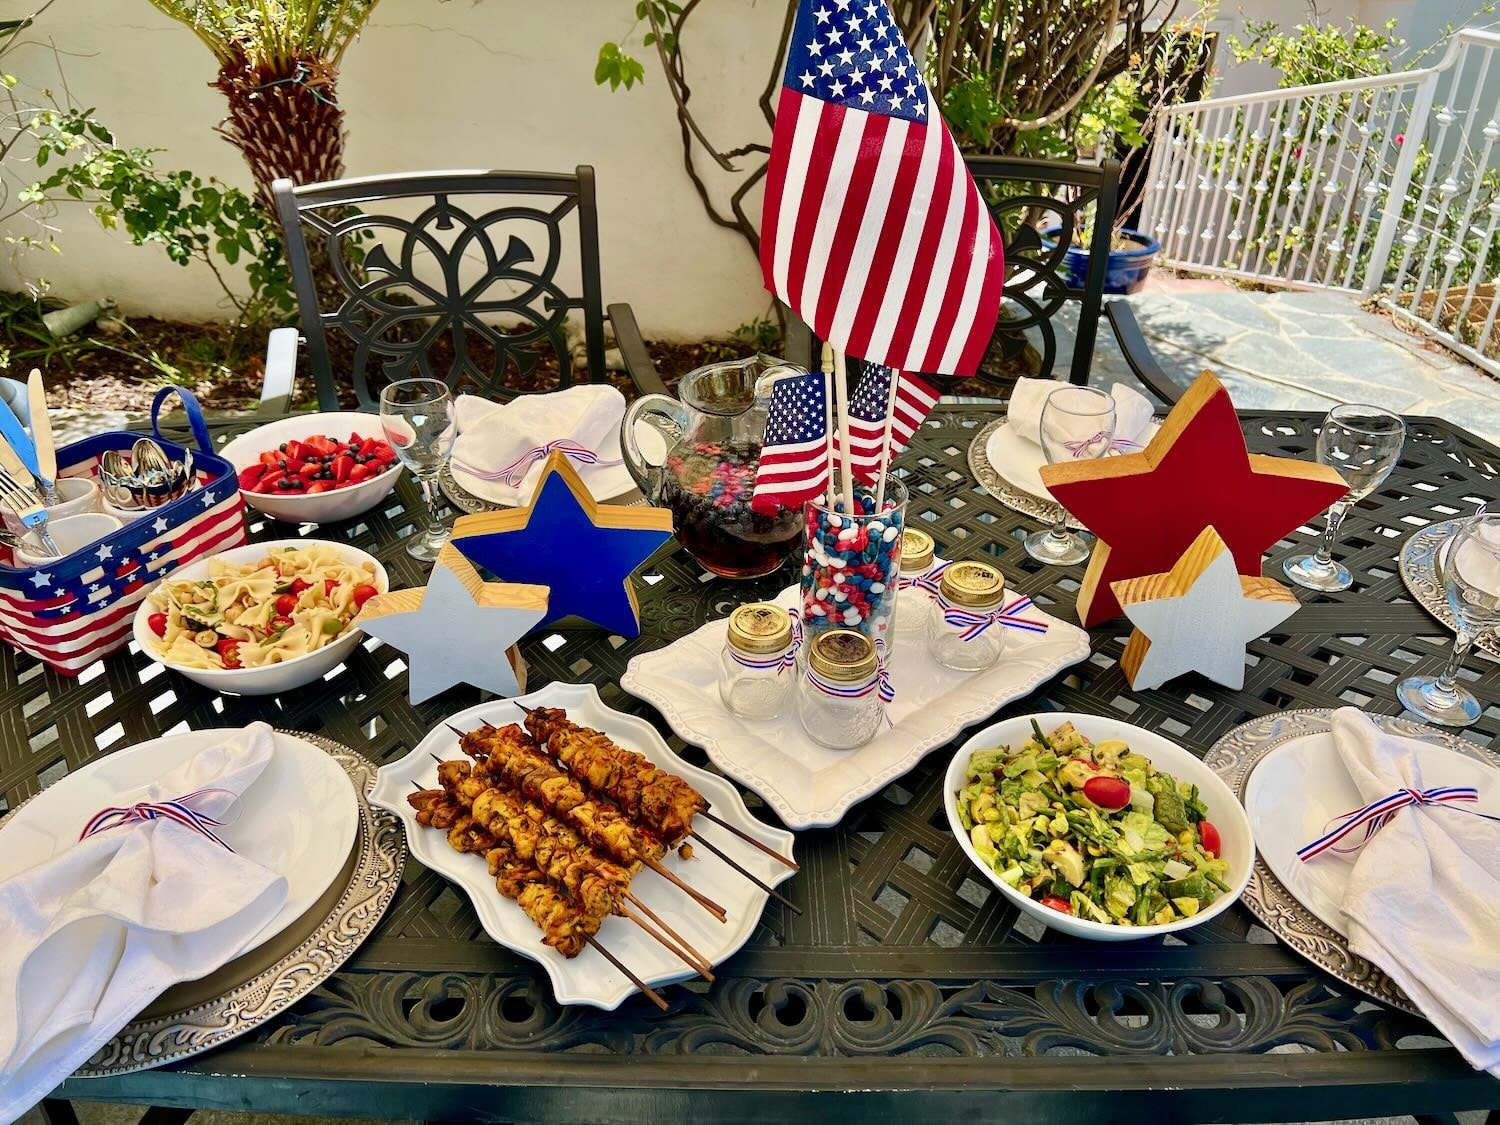 Festive 4th of July table set with healthy, delicious grilled food and seasonal side dishes.